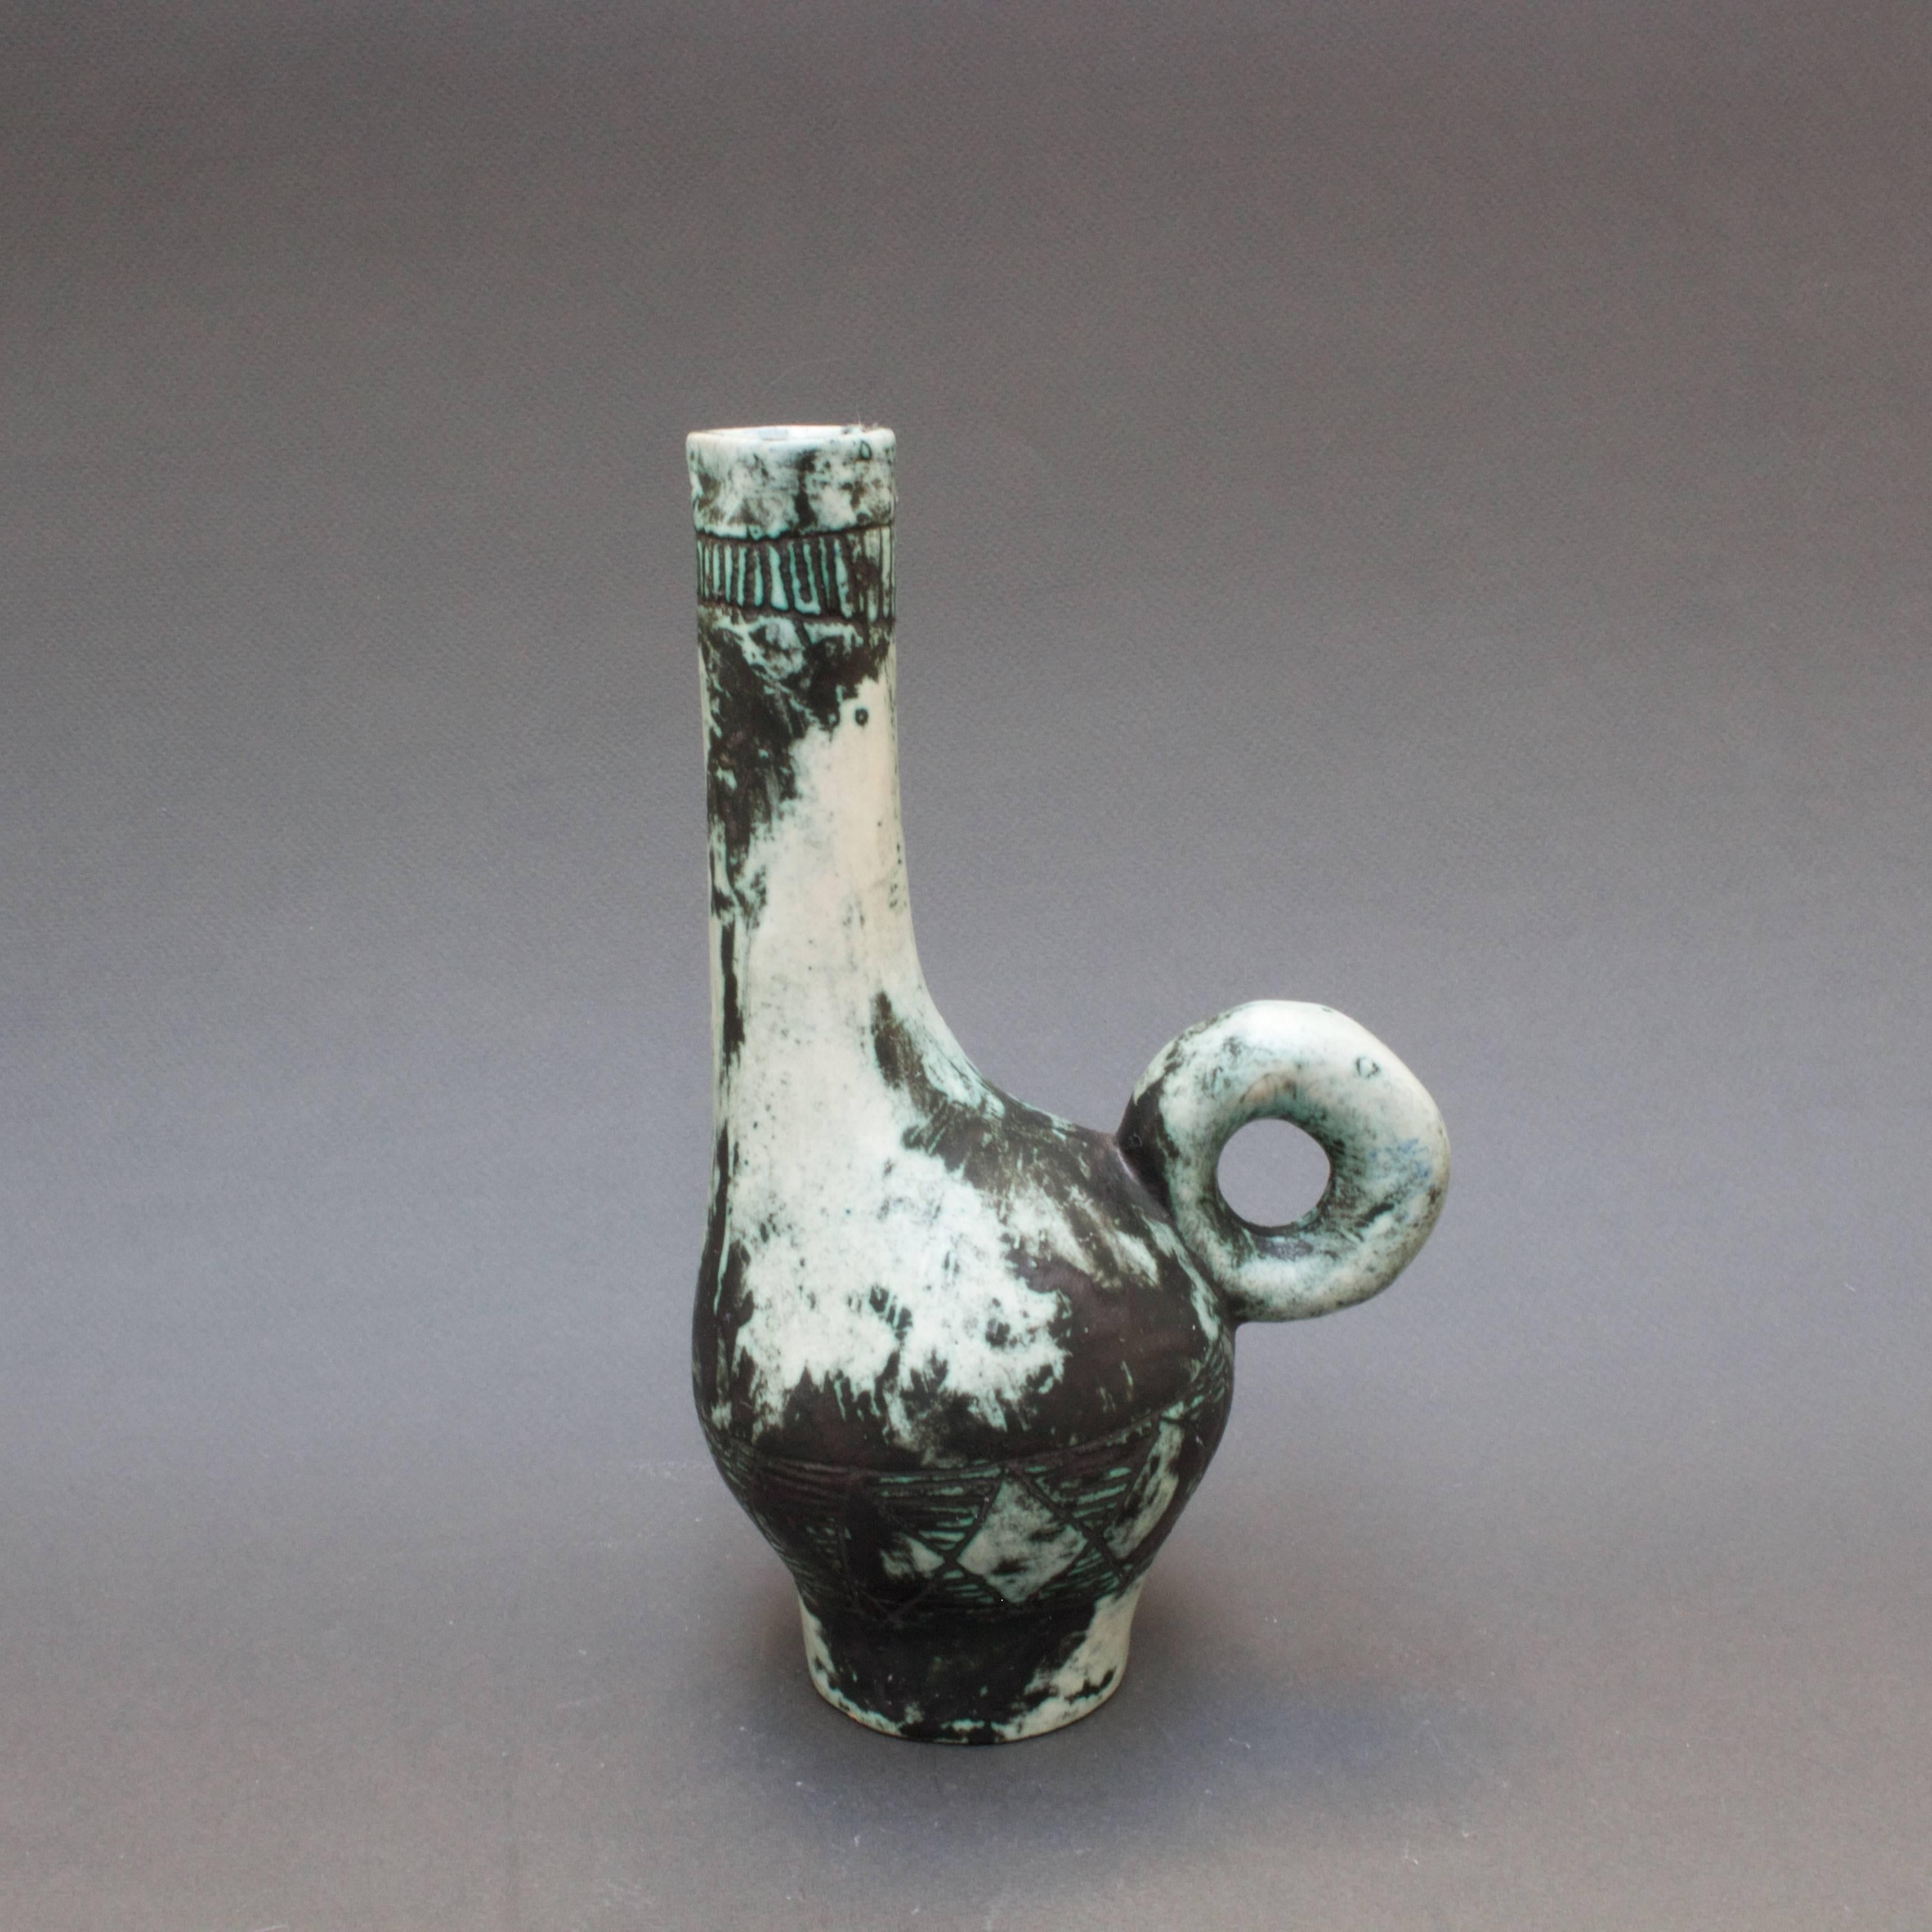 Ceramic spirits pitcher (c. 1950s) by Jacques Blin (1920 - 1995), an engineer by trade but with a love for the visual arts and an immediately recognisable style. A way of working characterised by a more or less misty appearance of the glaze and by